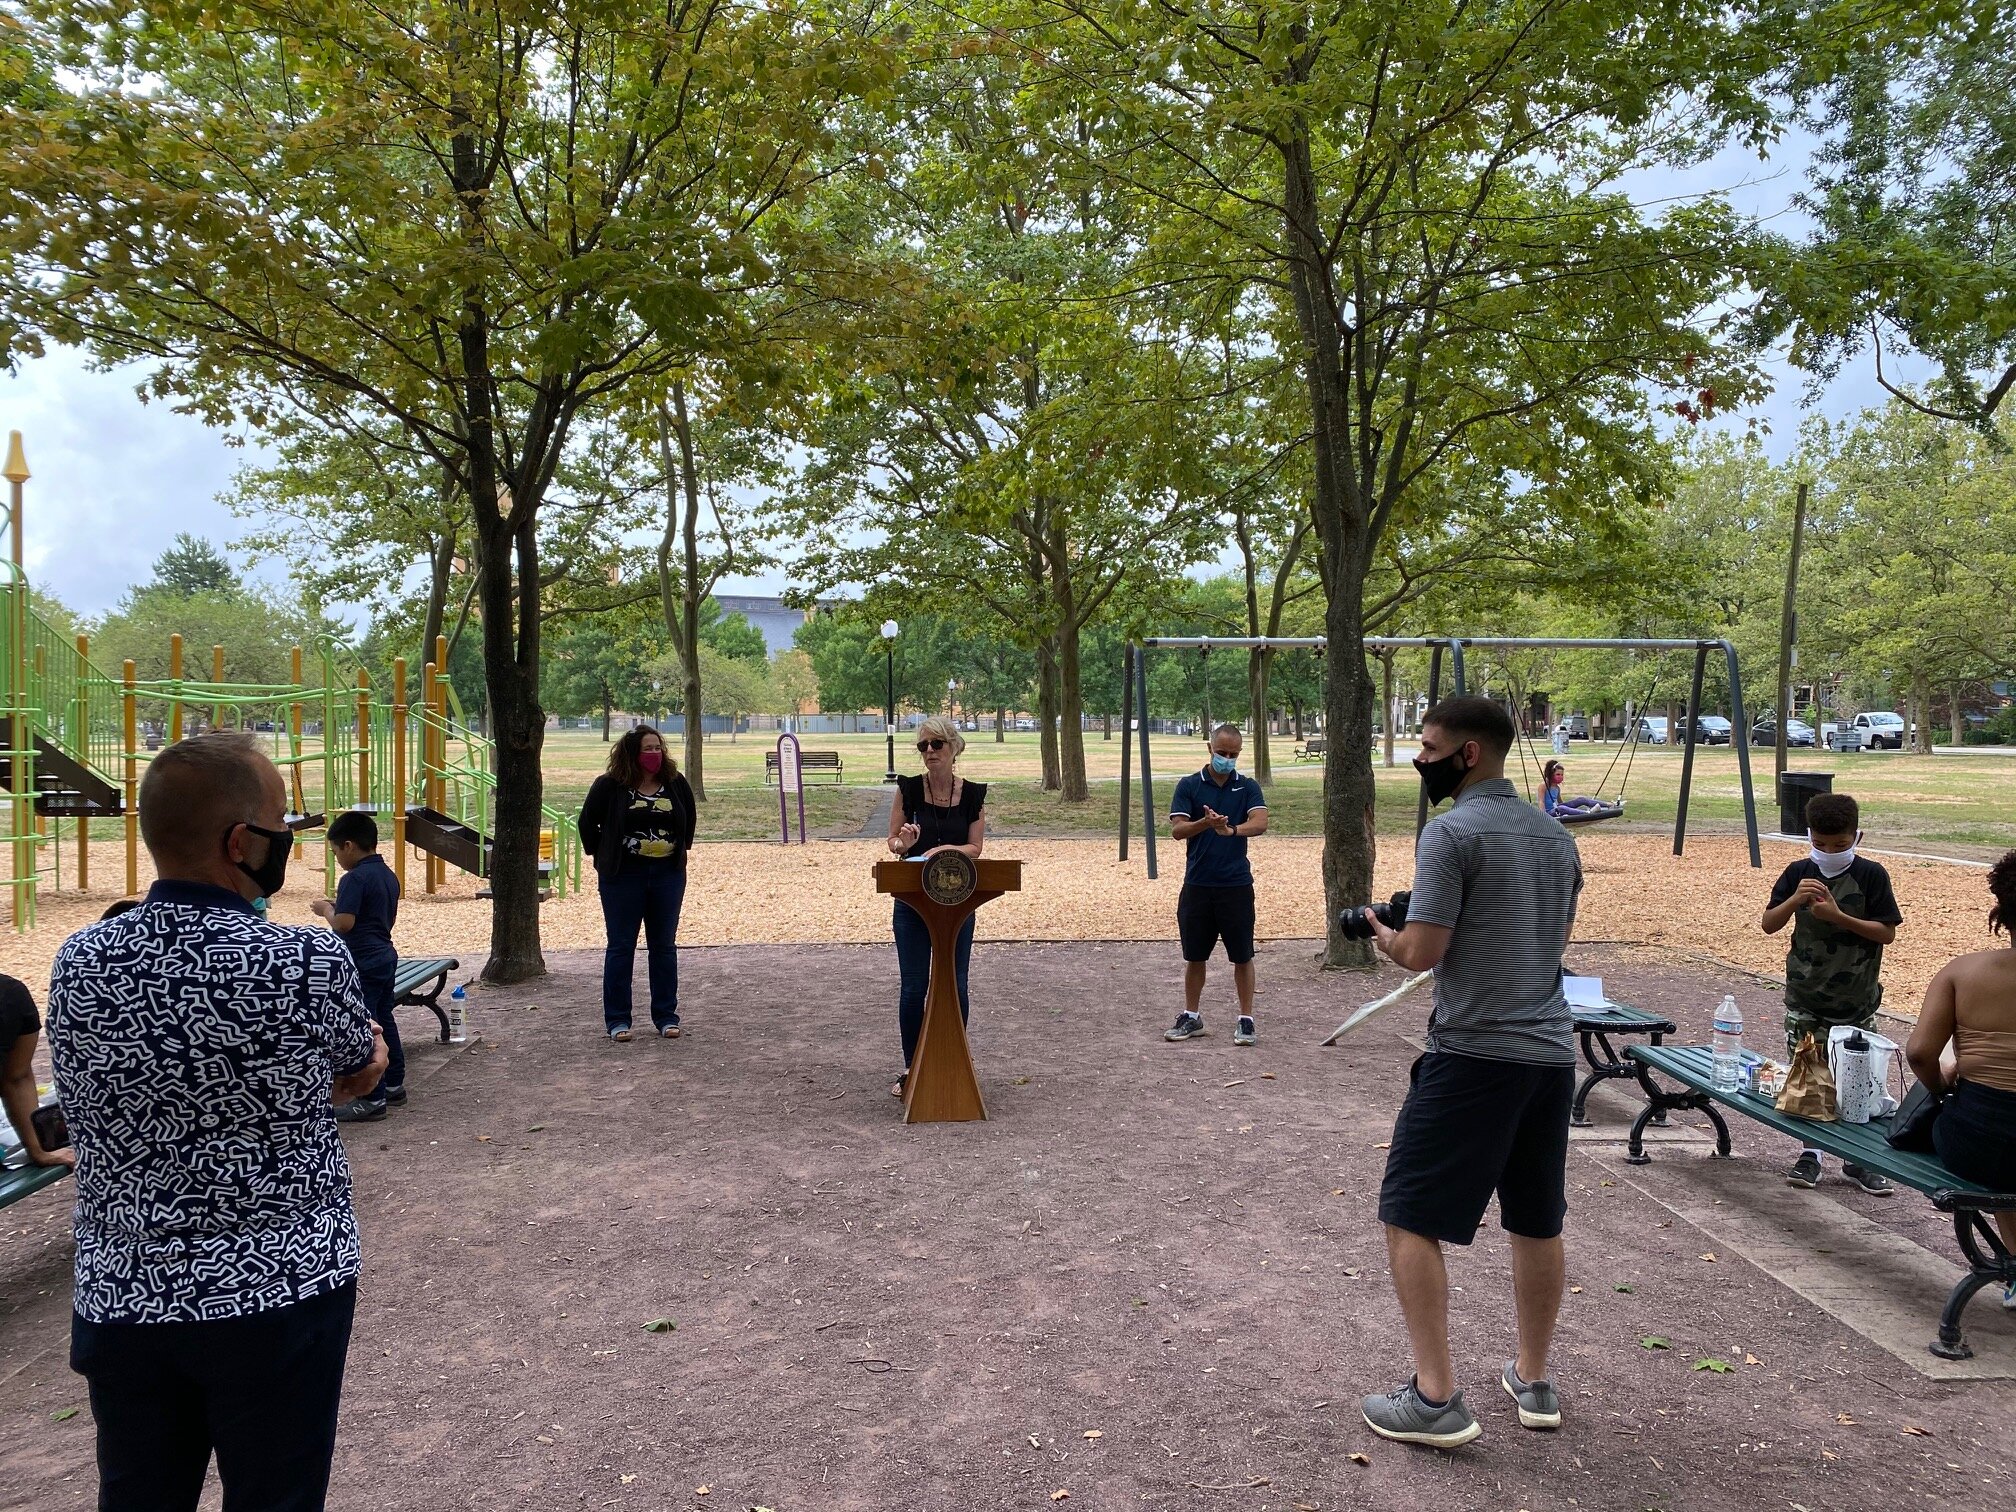  Parks Superintendent Wendy Nilsson applauds the “Partnership Power” involved in this project during a social-distanced ribbon cutting celebration in August 2020 